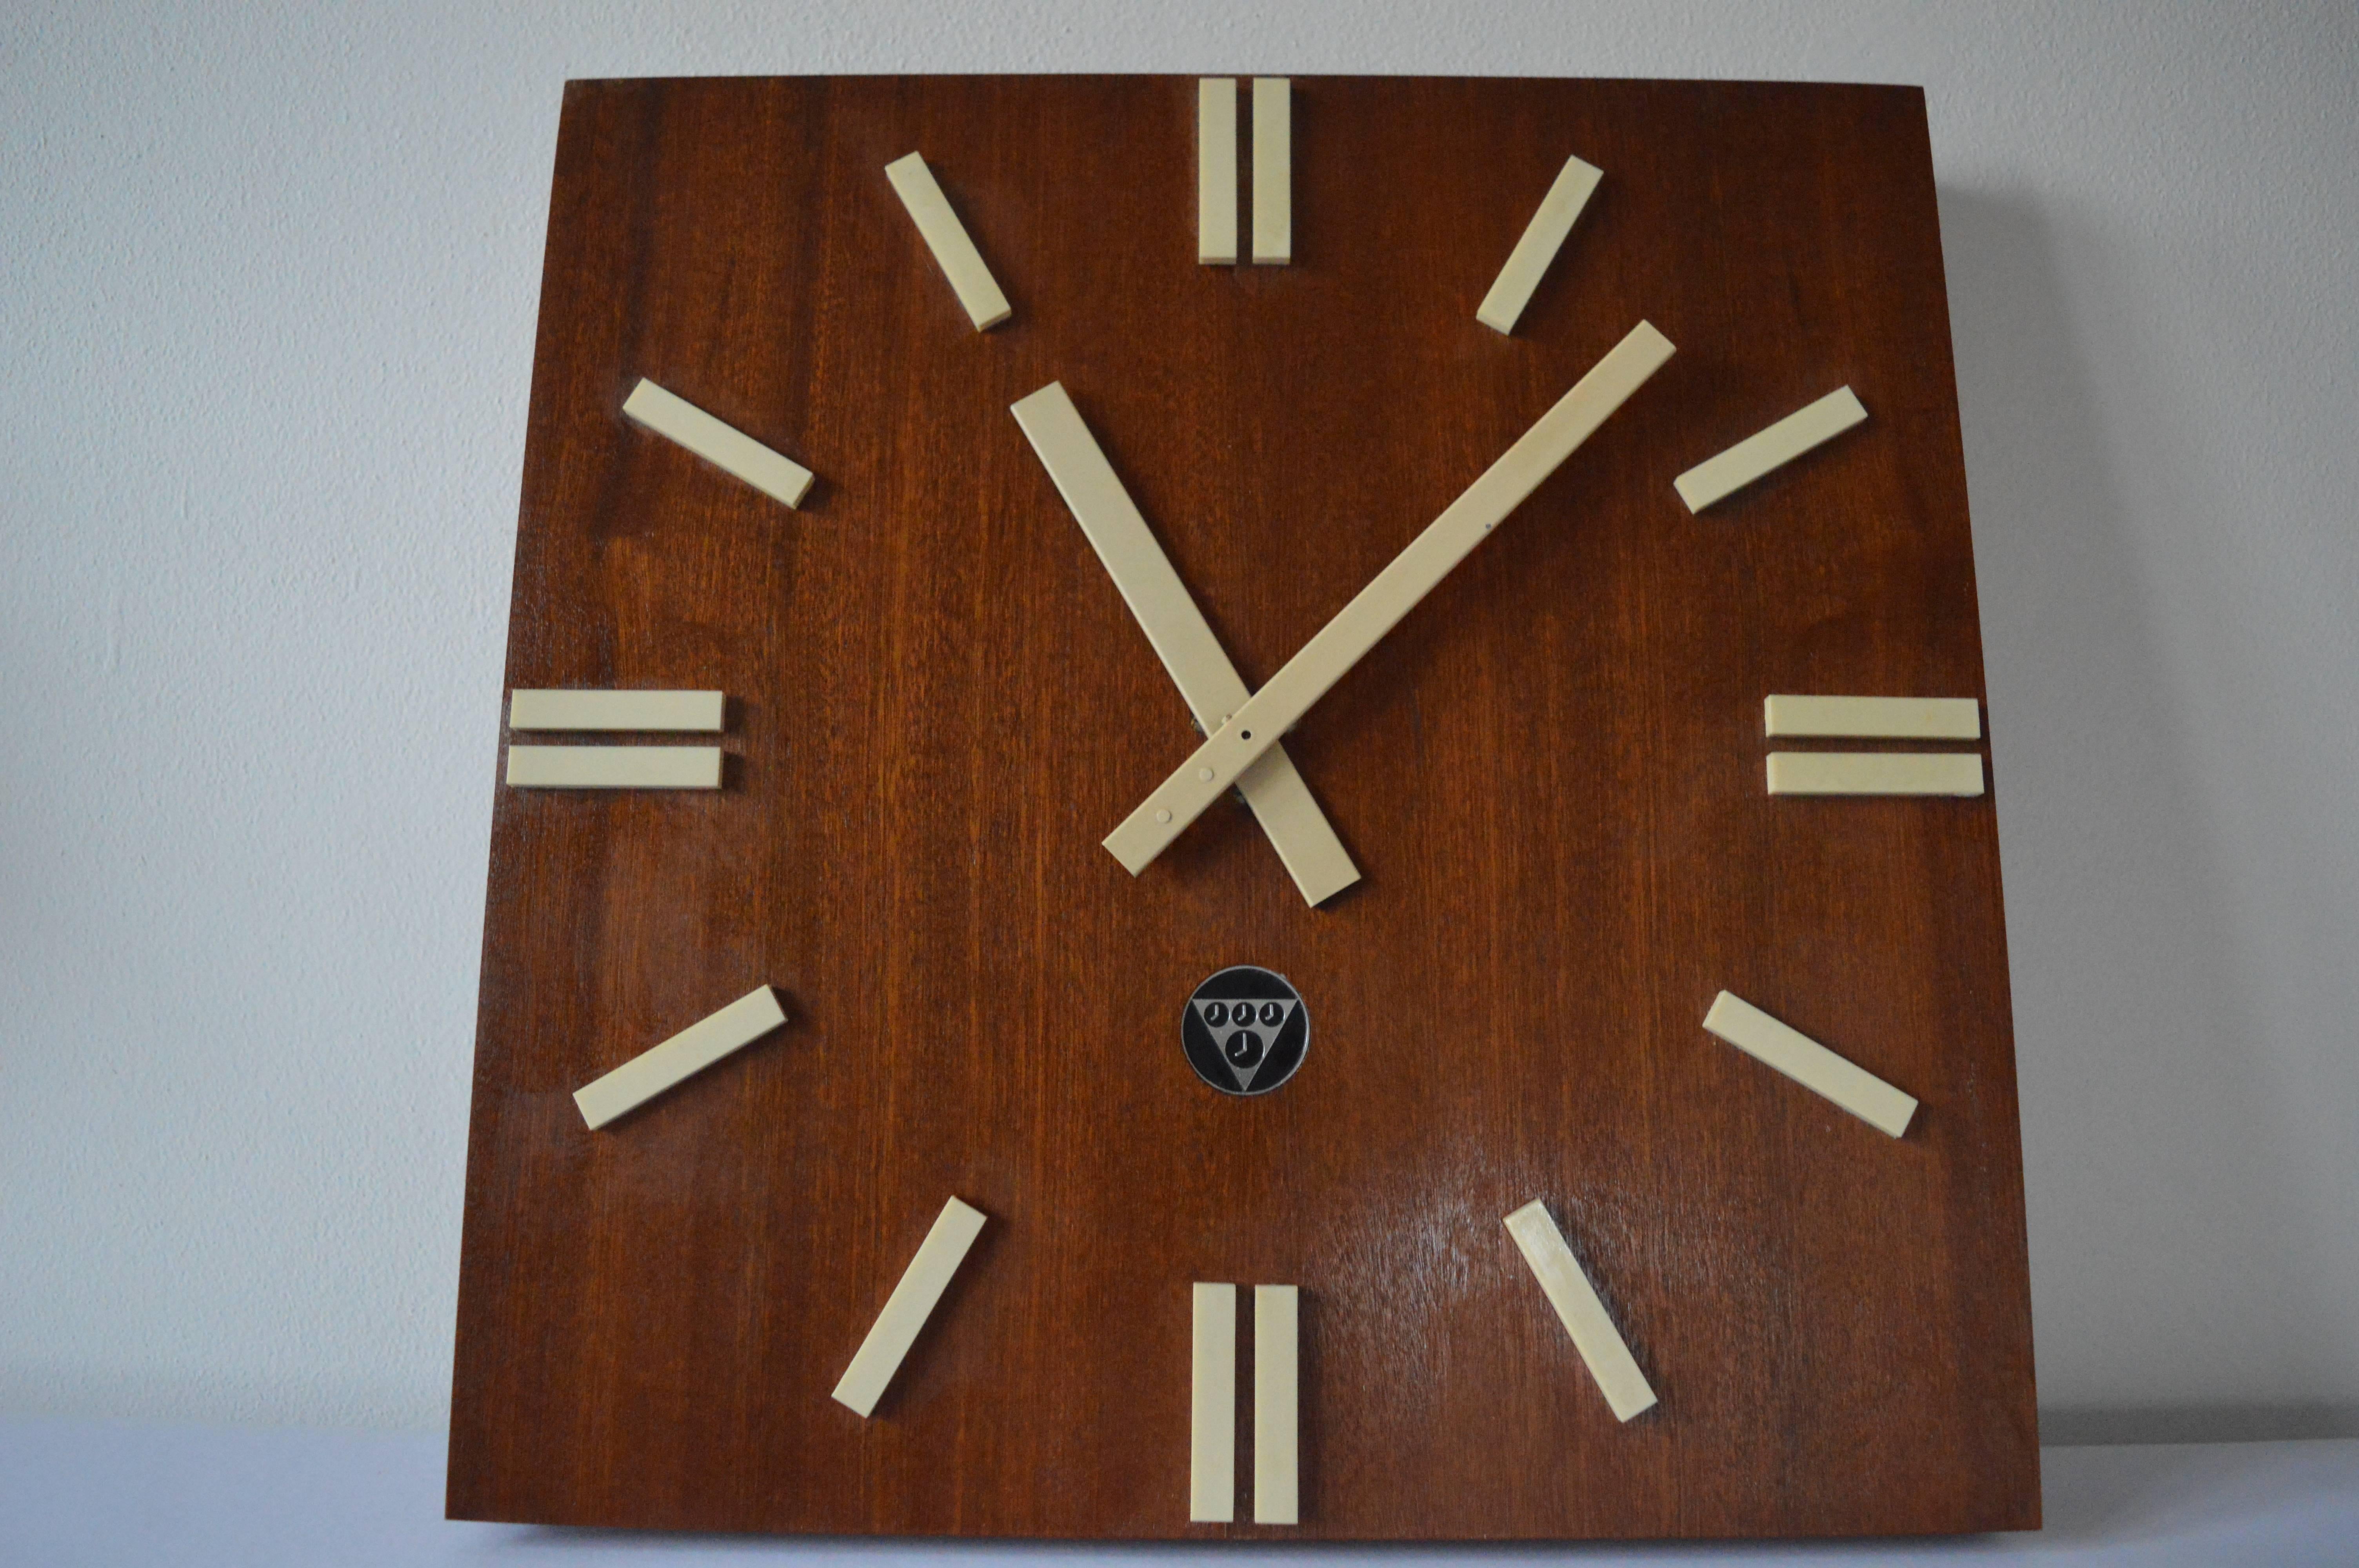 Very beautiful timeless design clock from Czechoslovakia. Mahogany veneer. Originally made for public spaces such as hospitals, offices, schools, factories, railway stations, restaurants. They can be simply transformed into a battery.